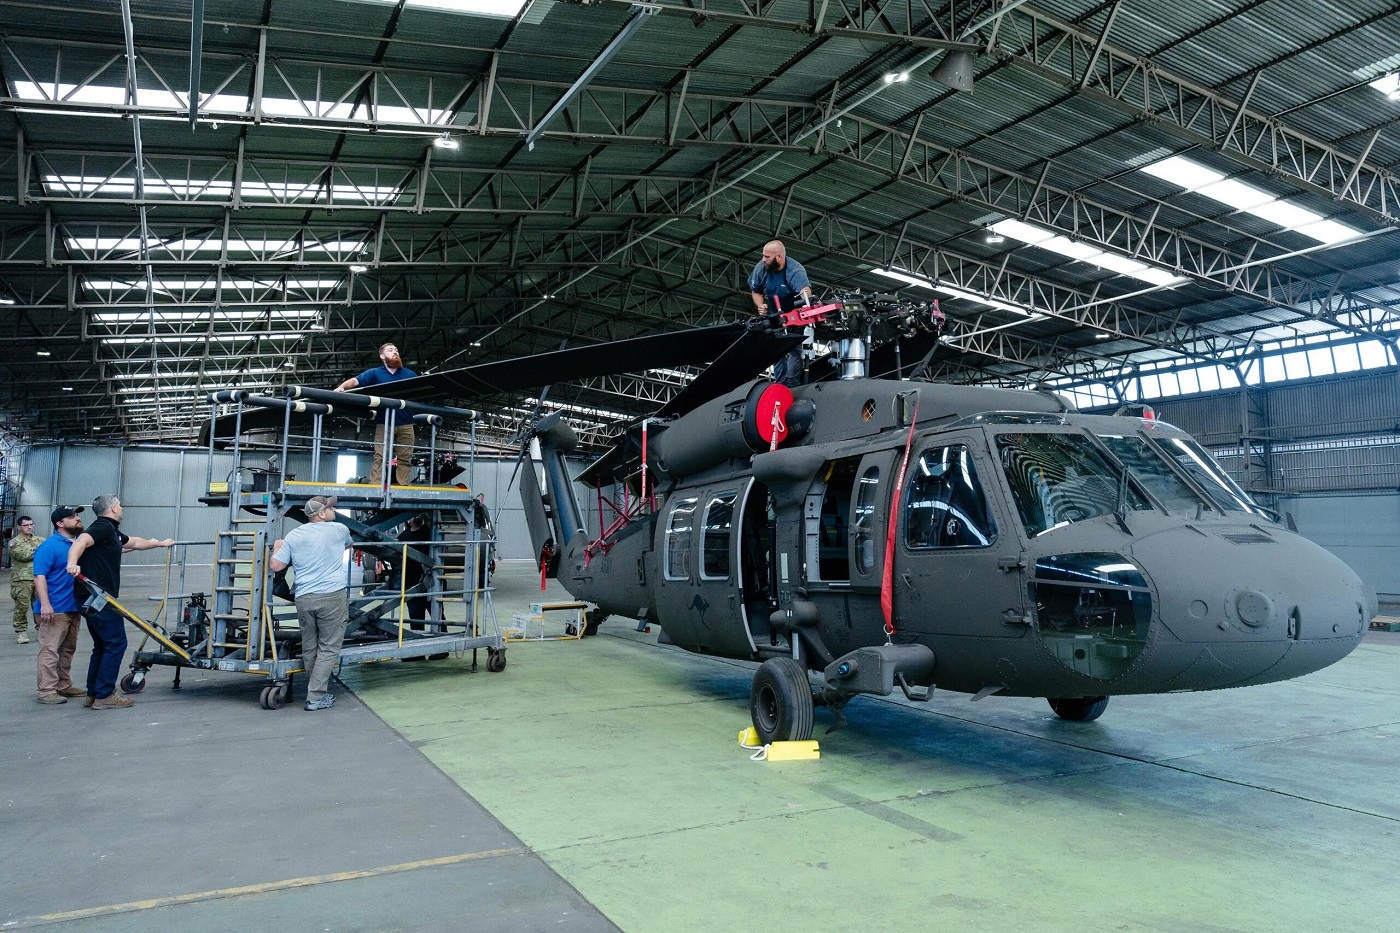 The Australian Defence Force received the first four new 3 UH-60M Black Hawk helicopters.